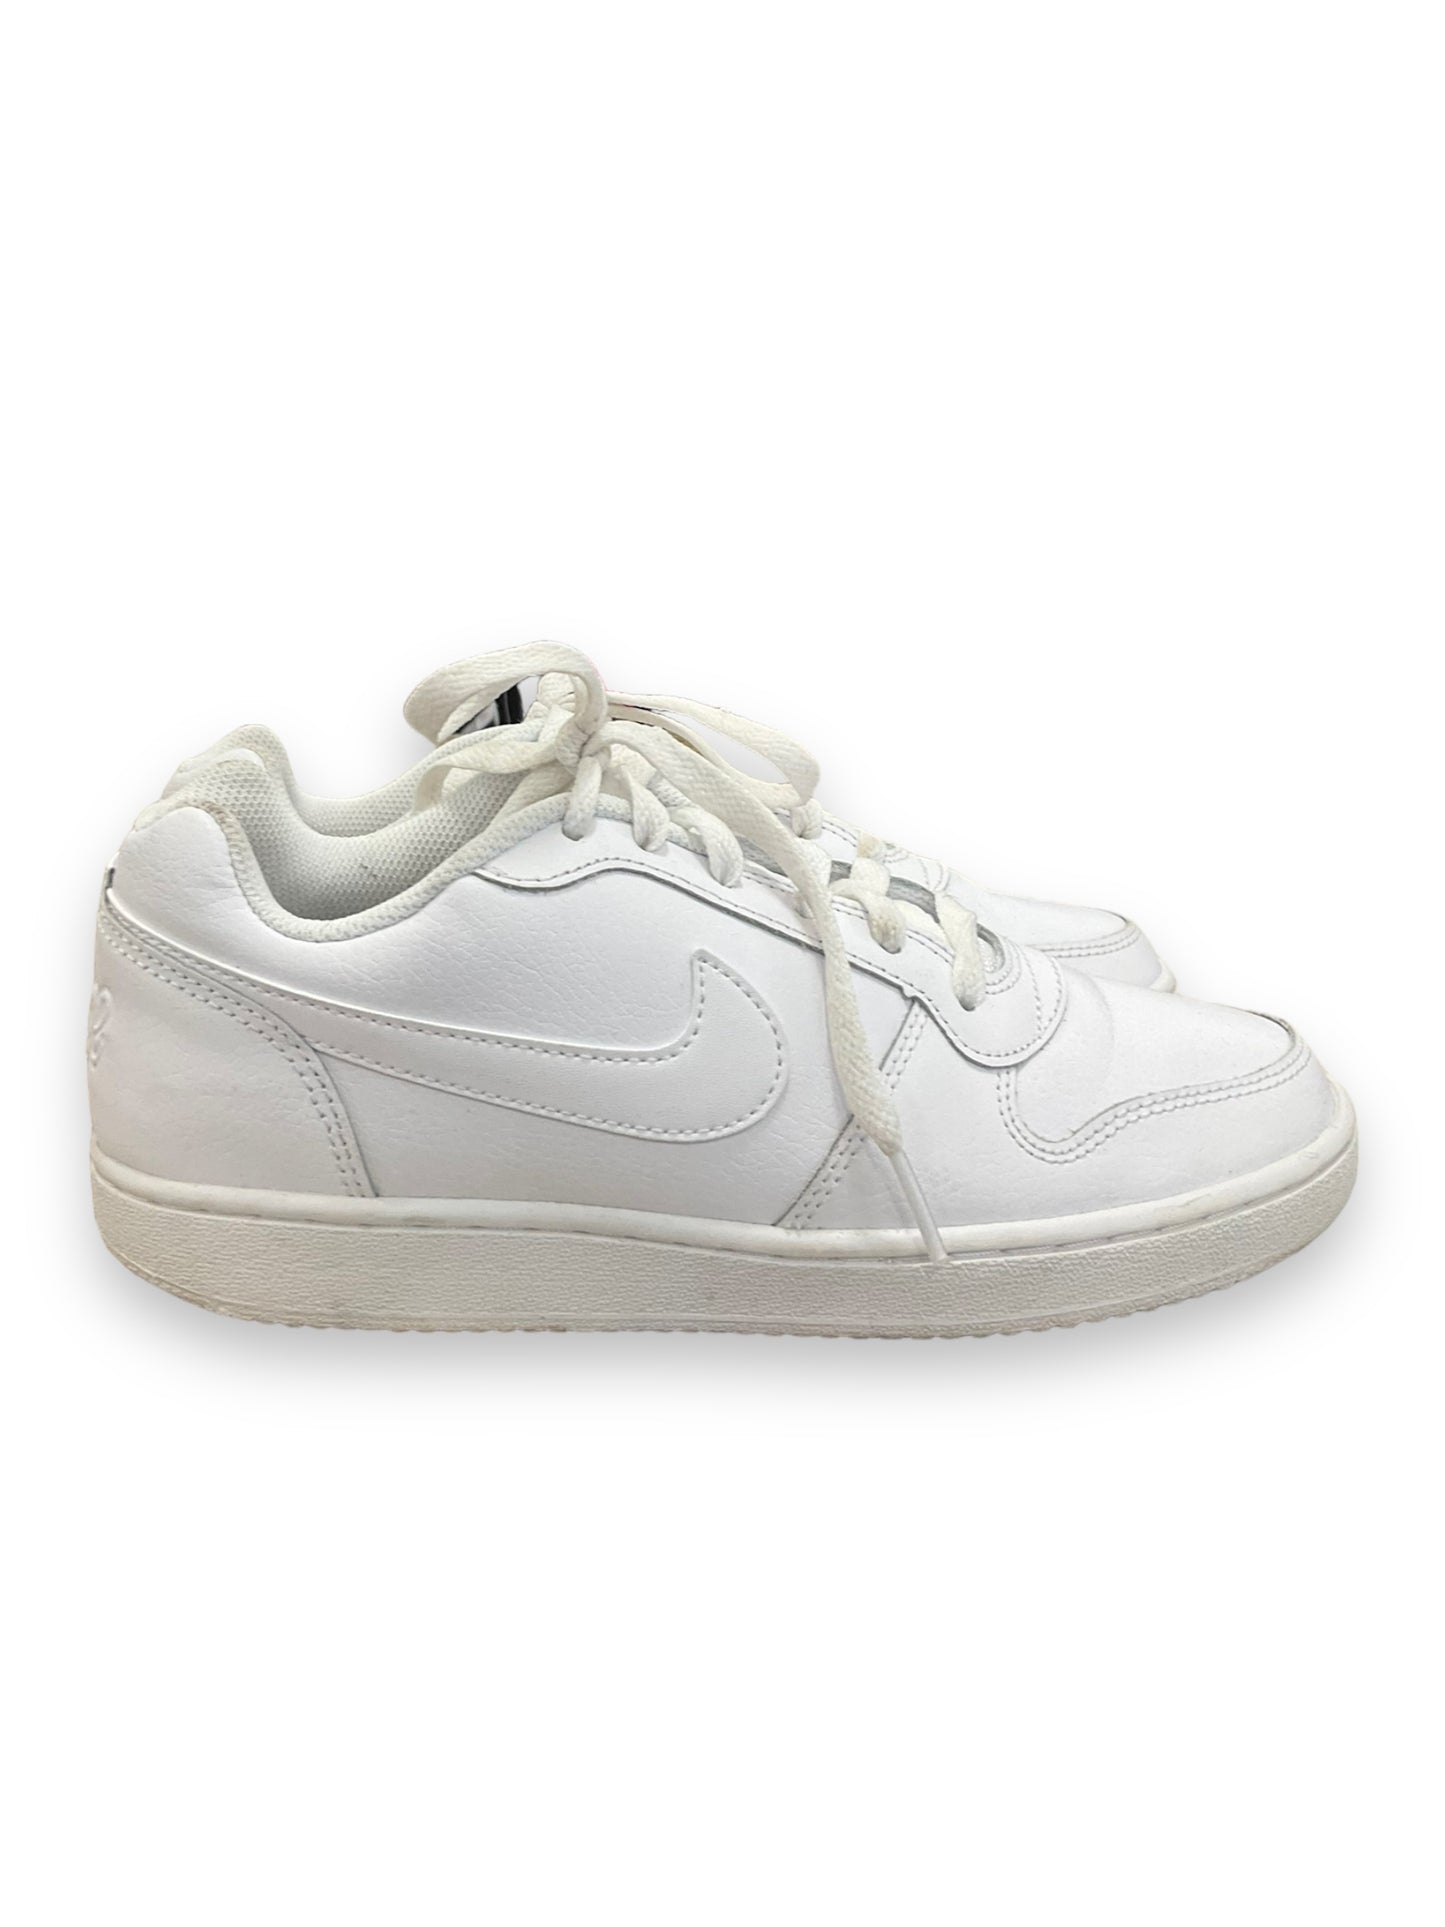 Shoes Sneakers By Nike  Size: 7.5